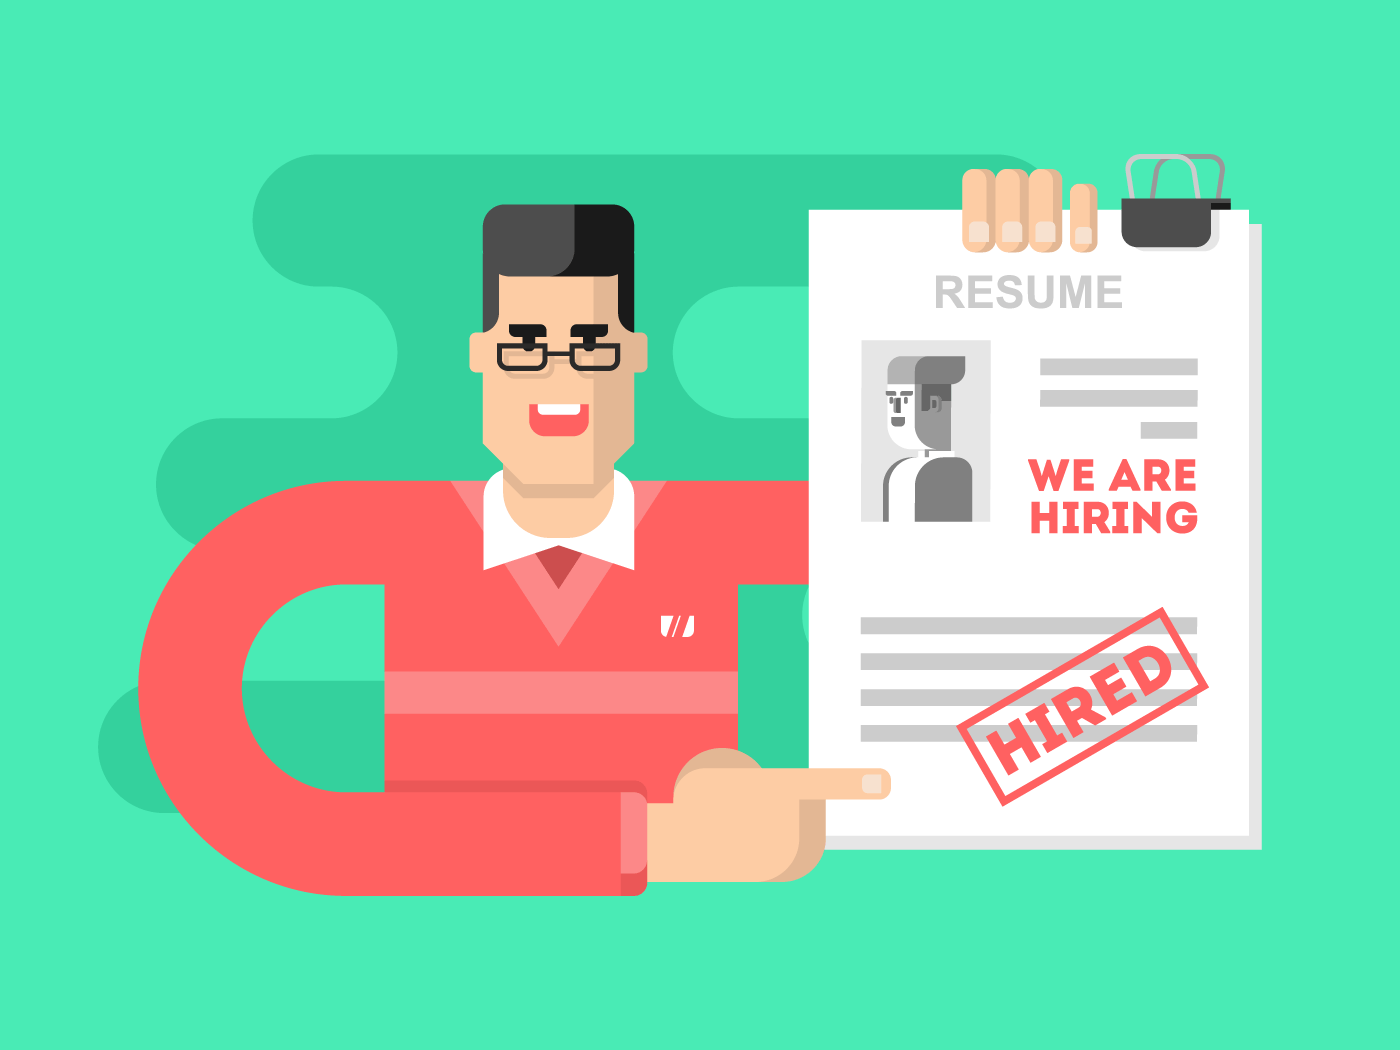 We are hiring. Accepted resume flat vector illustration